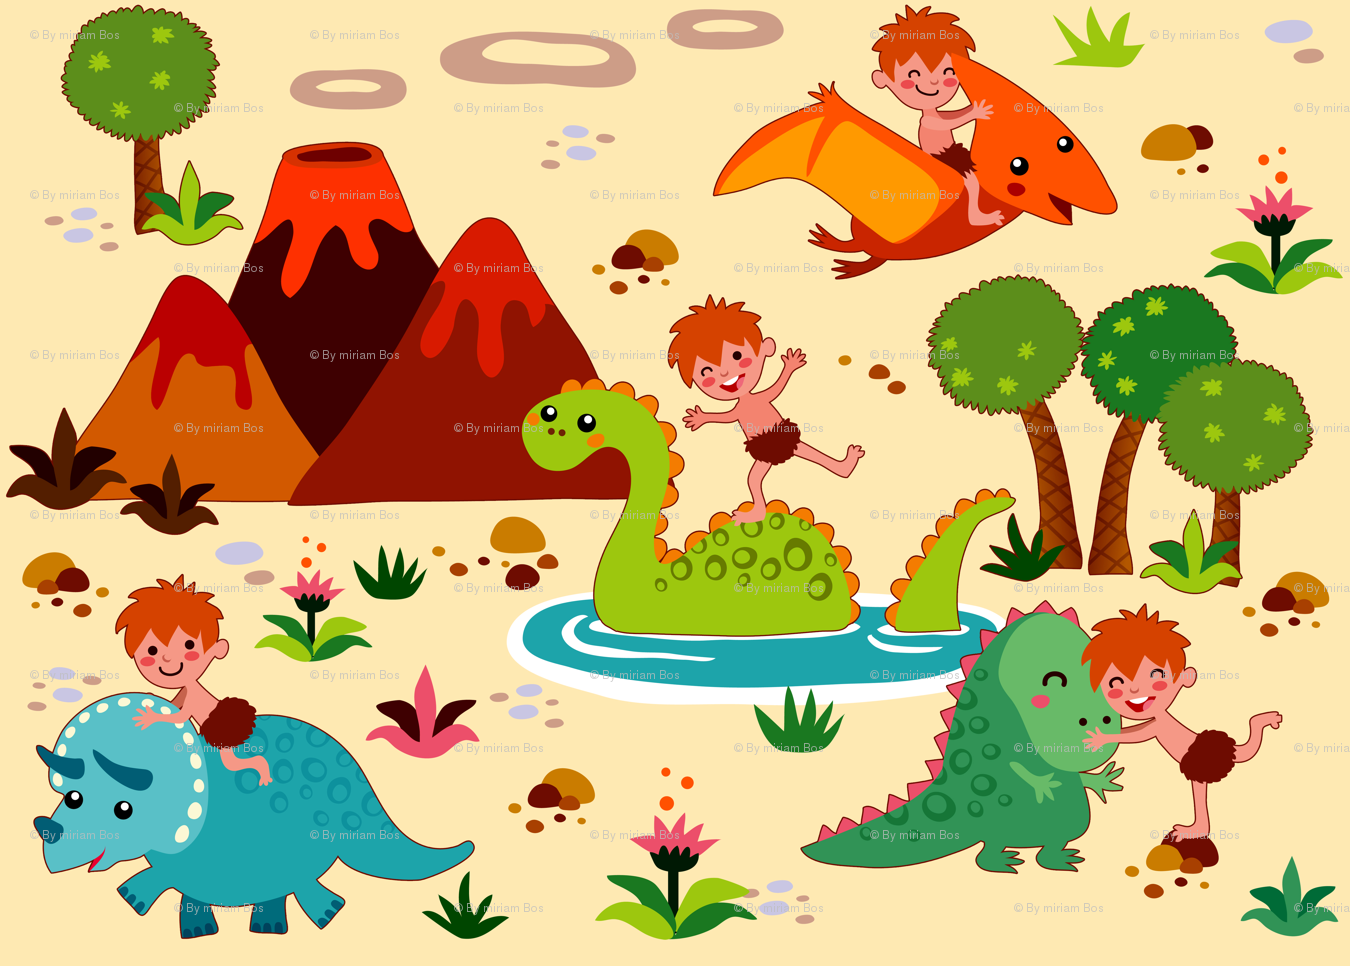 69 Cute Dinosaur Backgrounds On Wallpapersafari Choose from over a million free vectors, clipart graphics, vector art images, design templates, and illustrations created by artists worldwide! 69 cute dinosaur backgrounds on